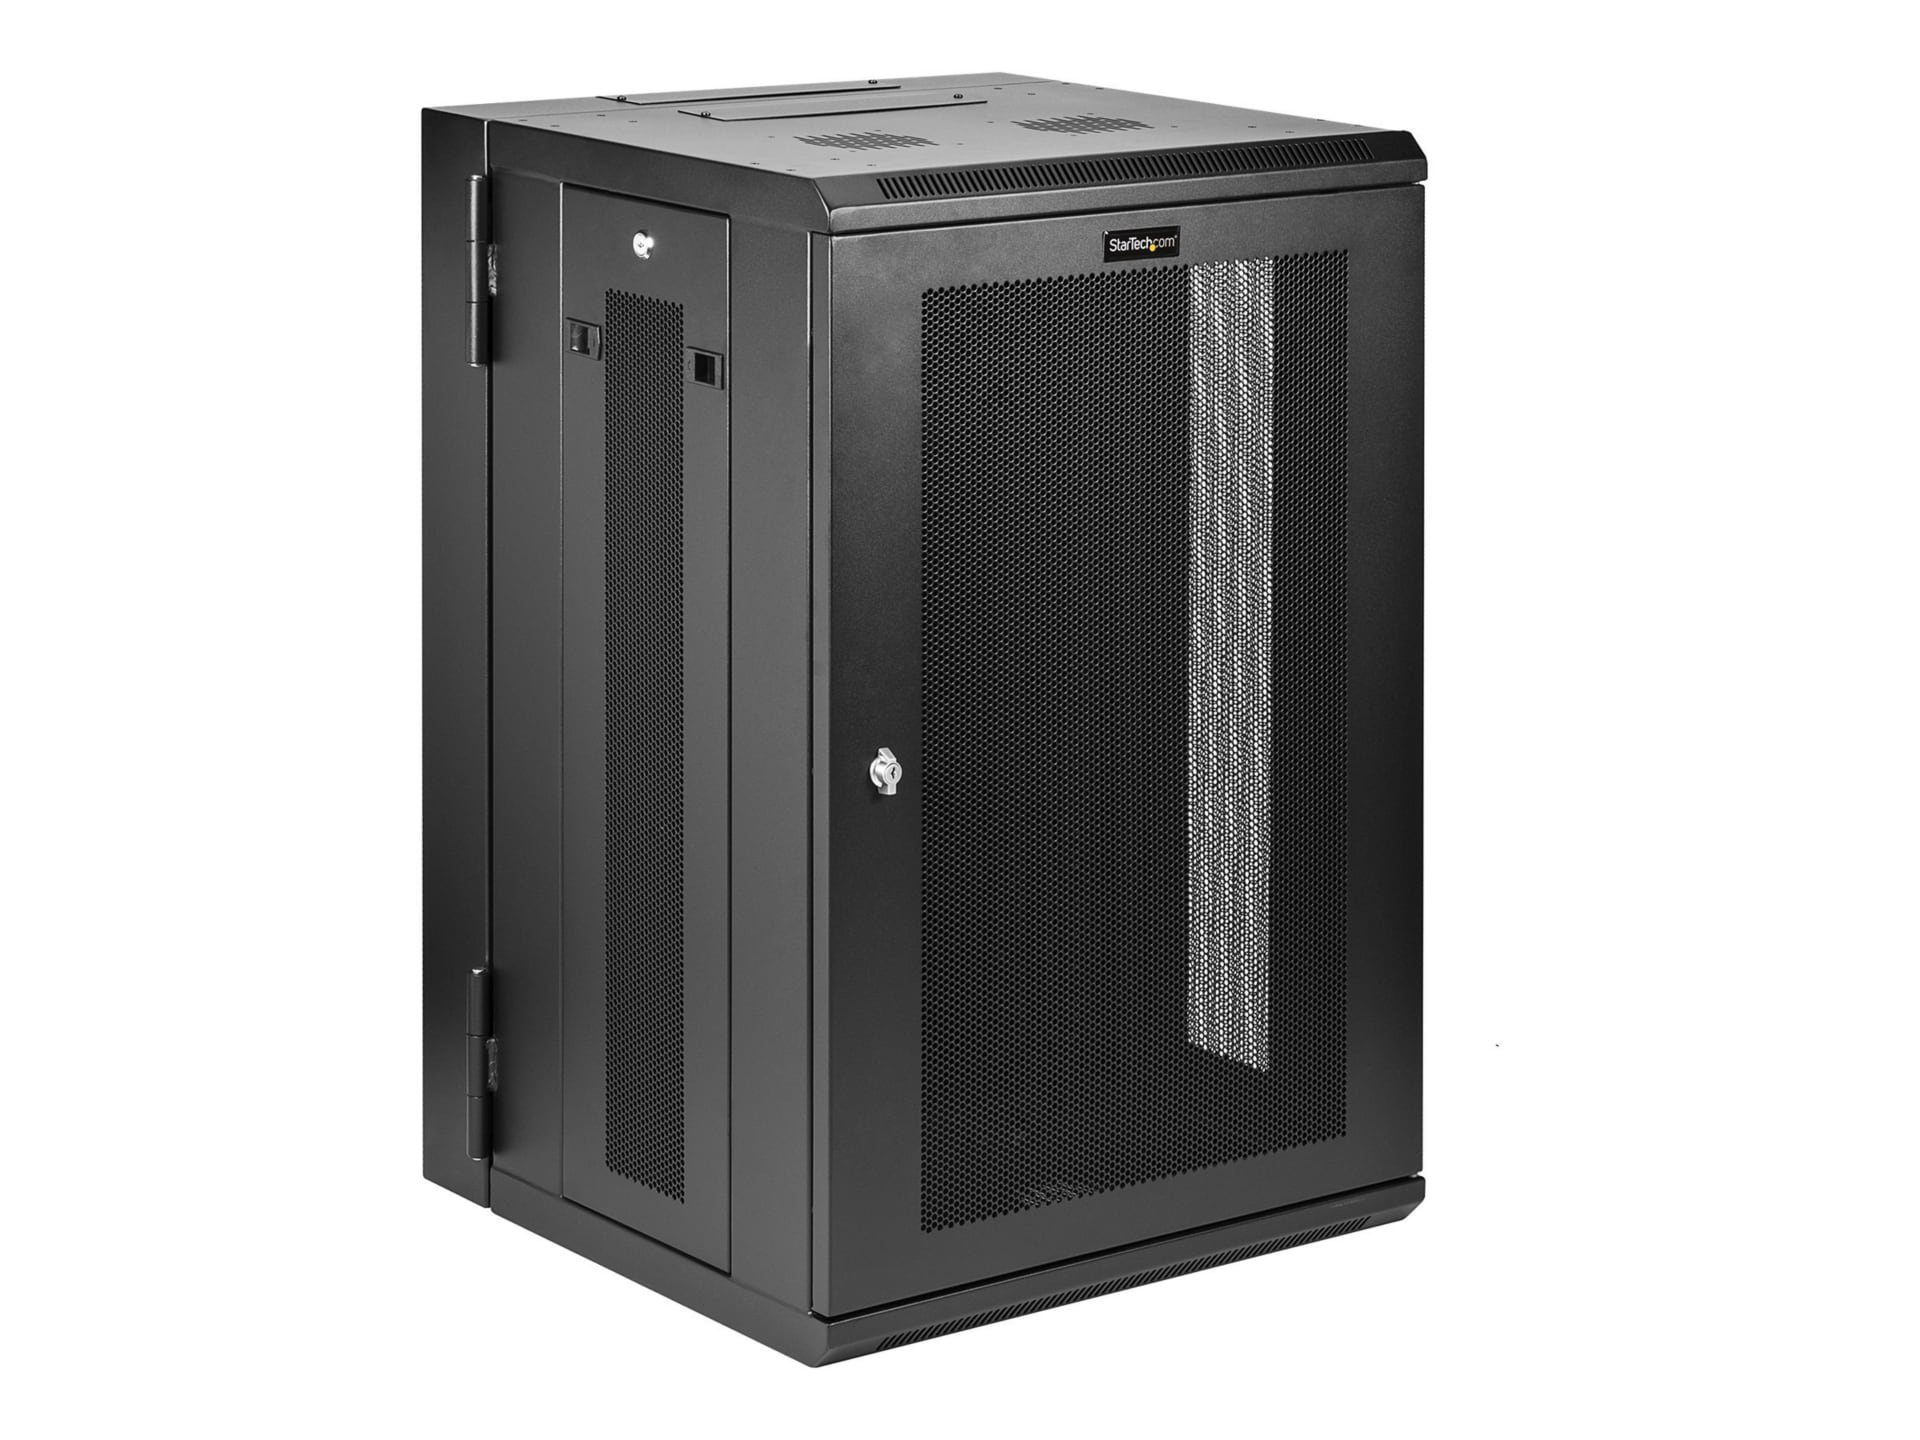 StarTech.com 4-Post 18U Wall Mount Network Cabinet, 19" Hinged Wall-Mounted Server Rack Enclosure for IT Equipment